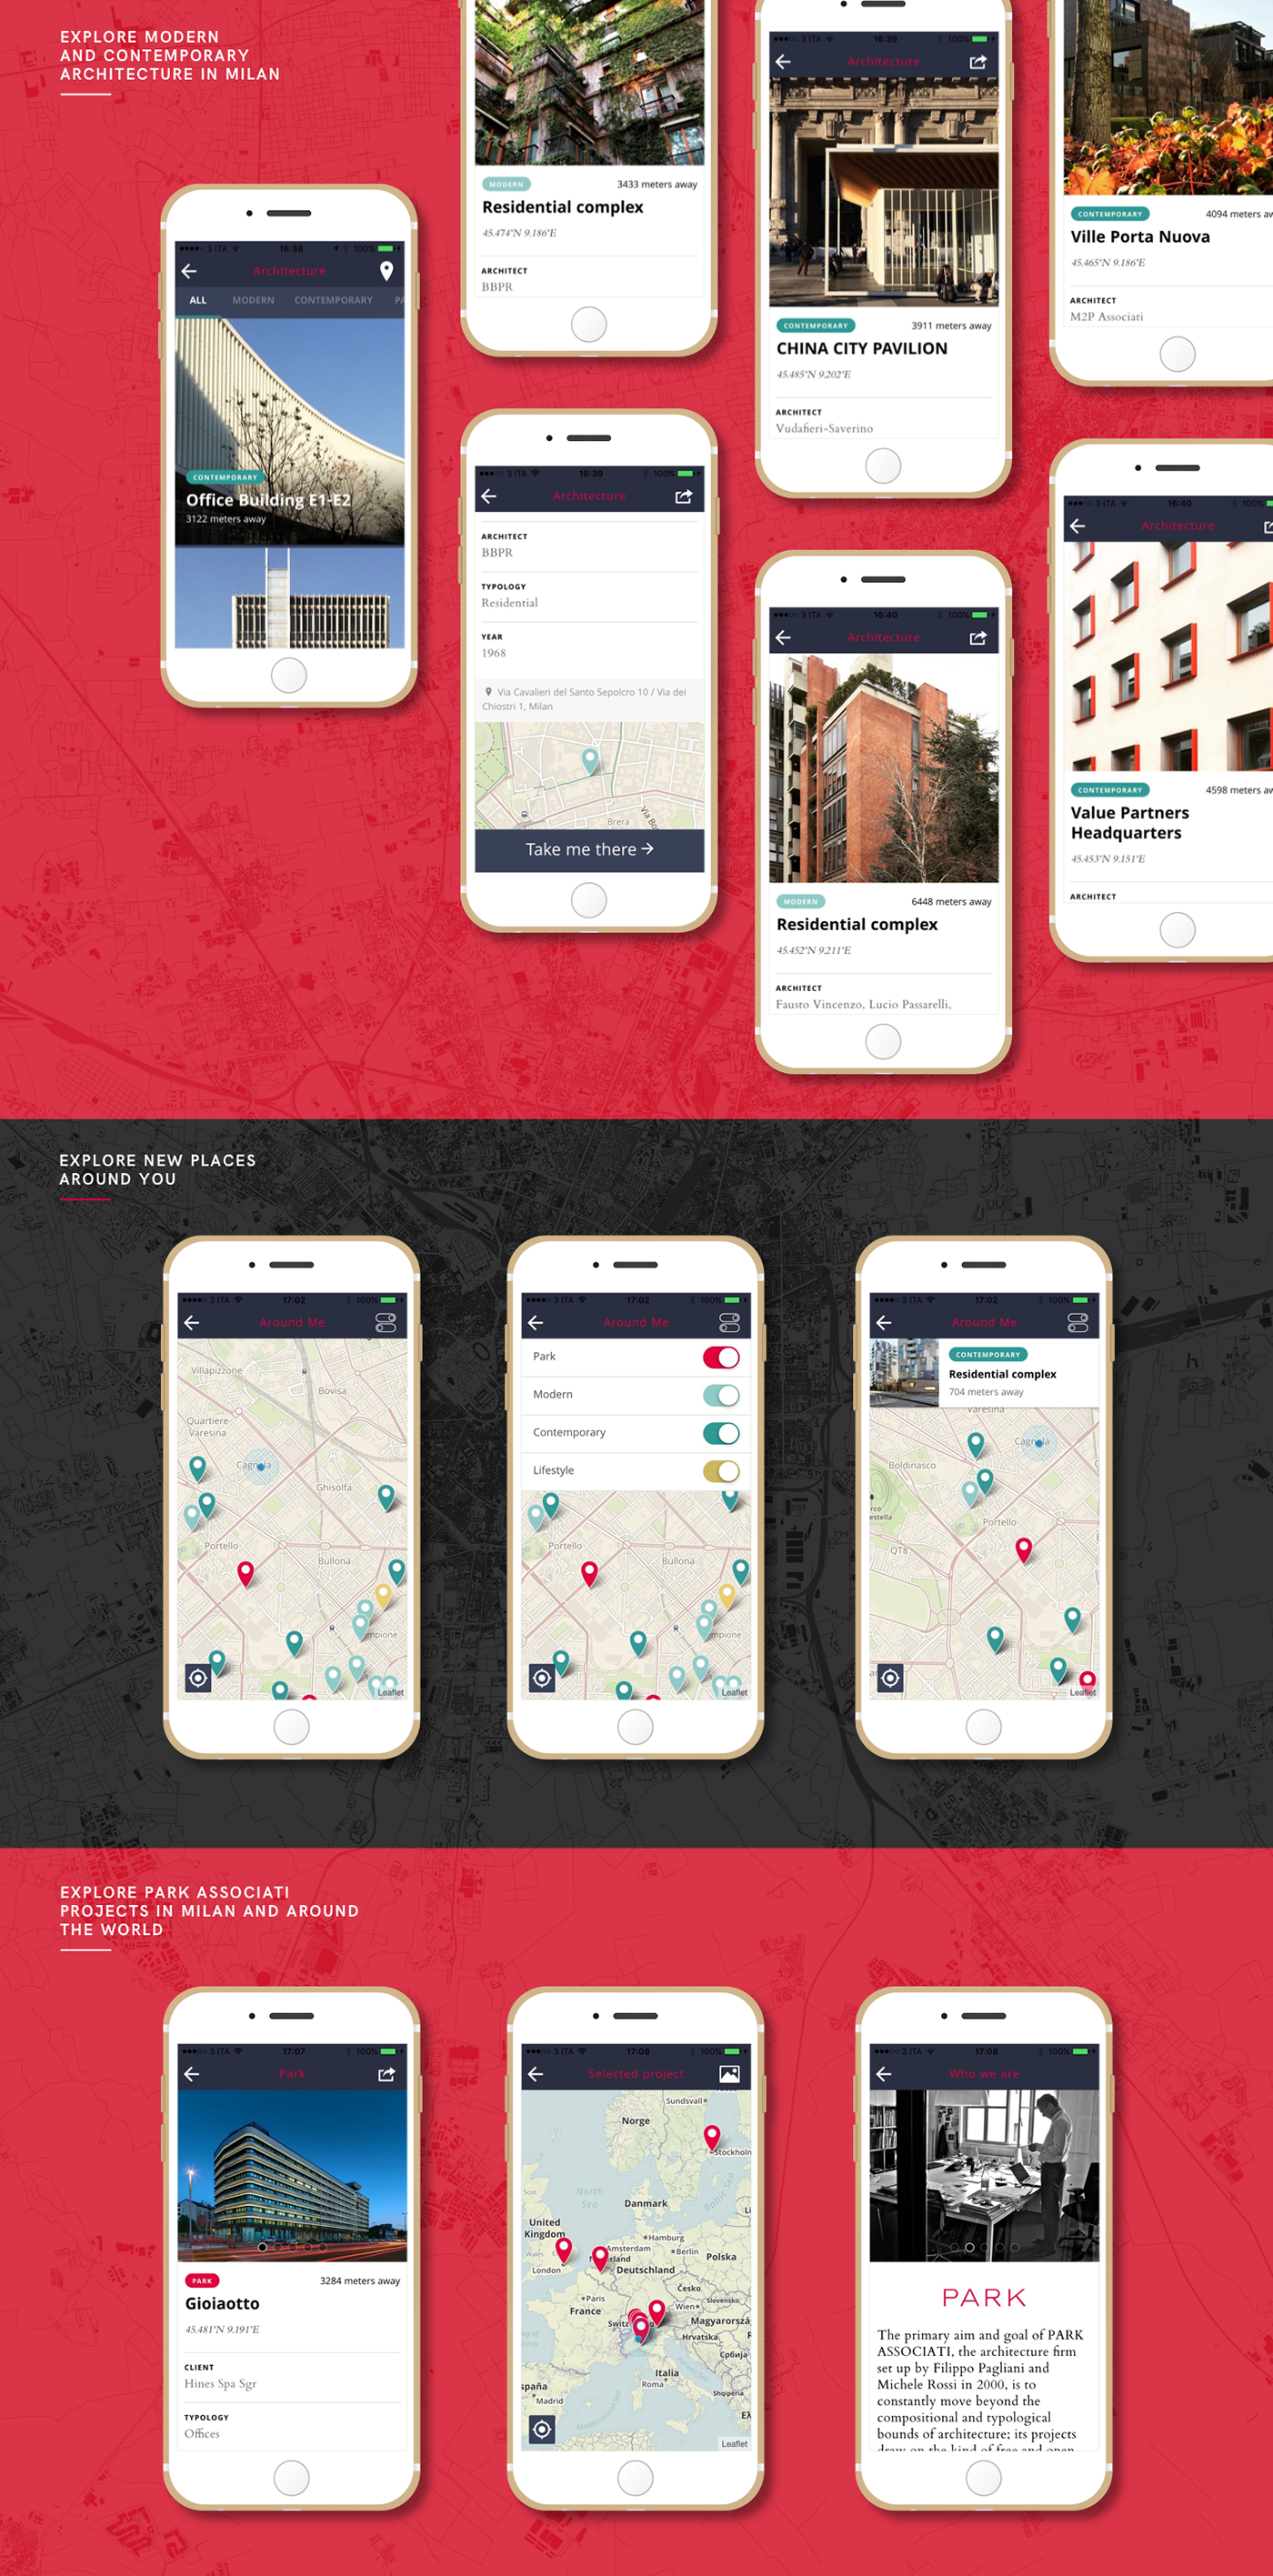 app ios android Ionic PARK Associati mobile architecture milan travel guide